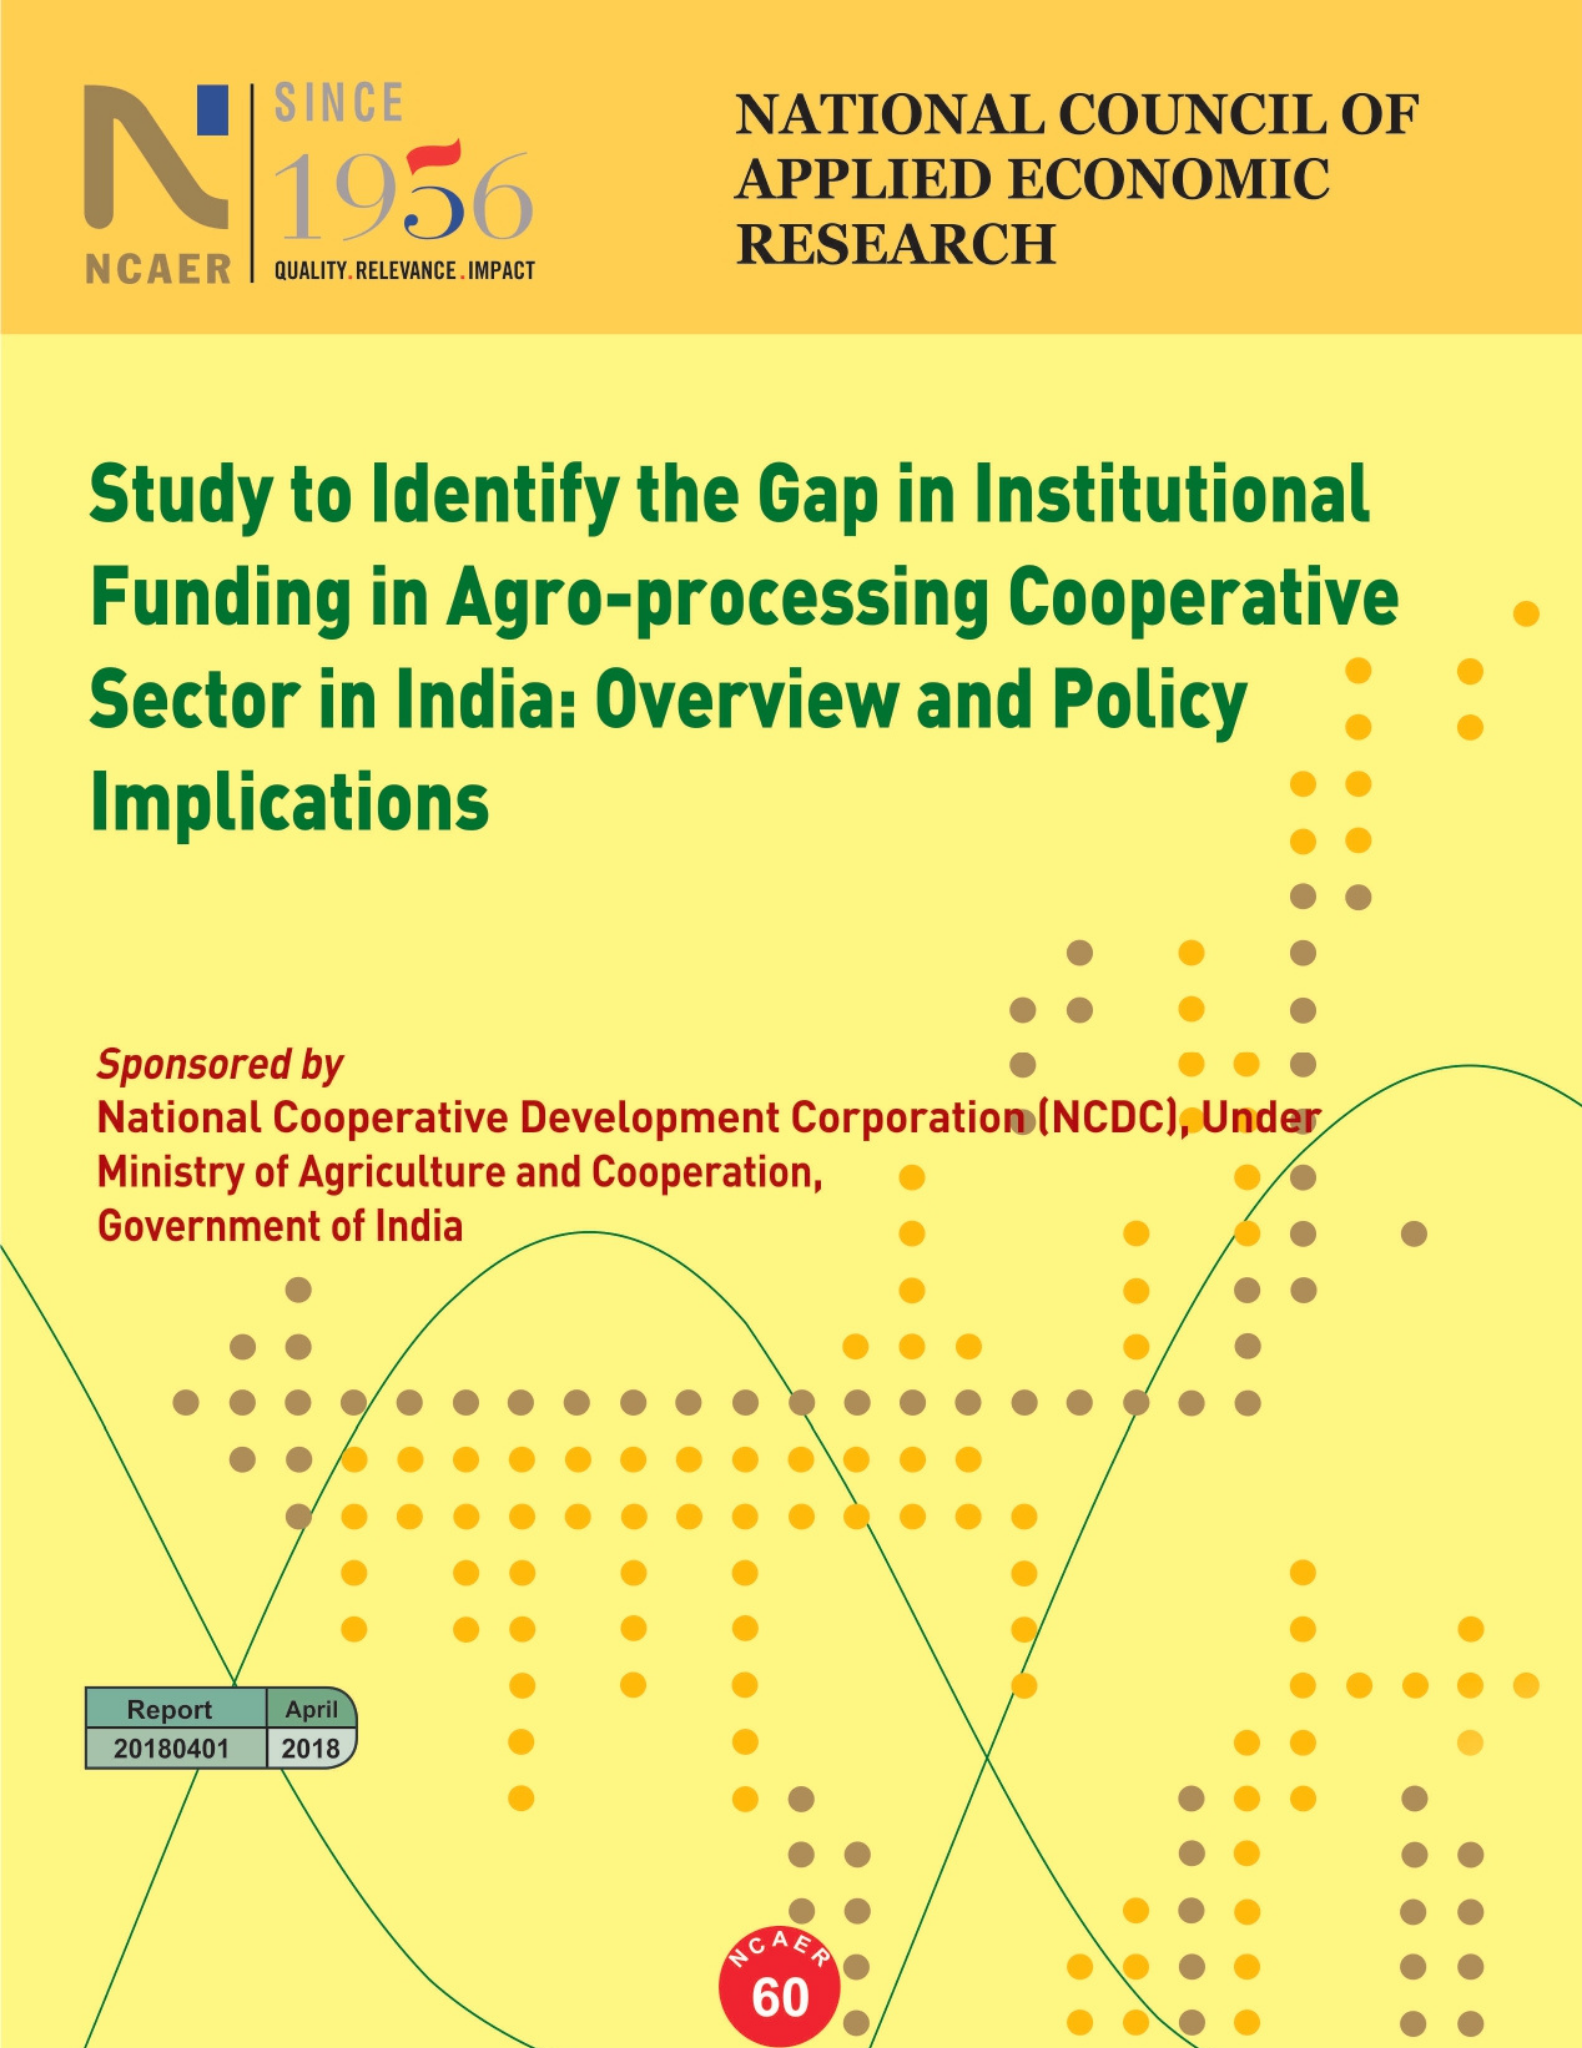 Study to Identify the Gap in Institutional Funding in Agro-Processing Cooperative Sector in India: Overview and Policy Implications